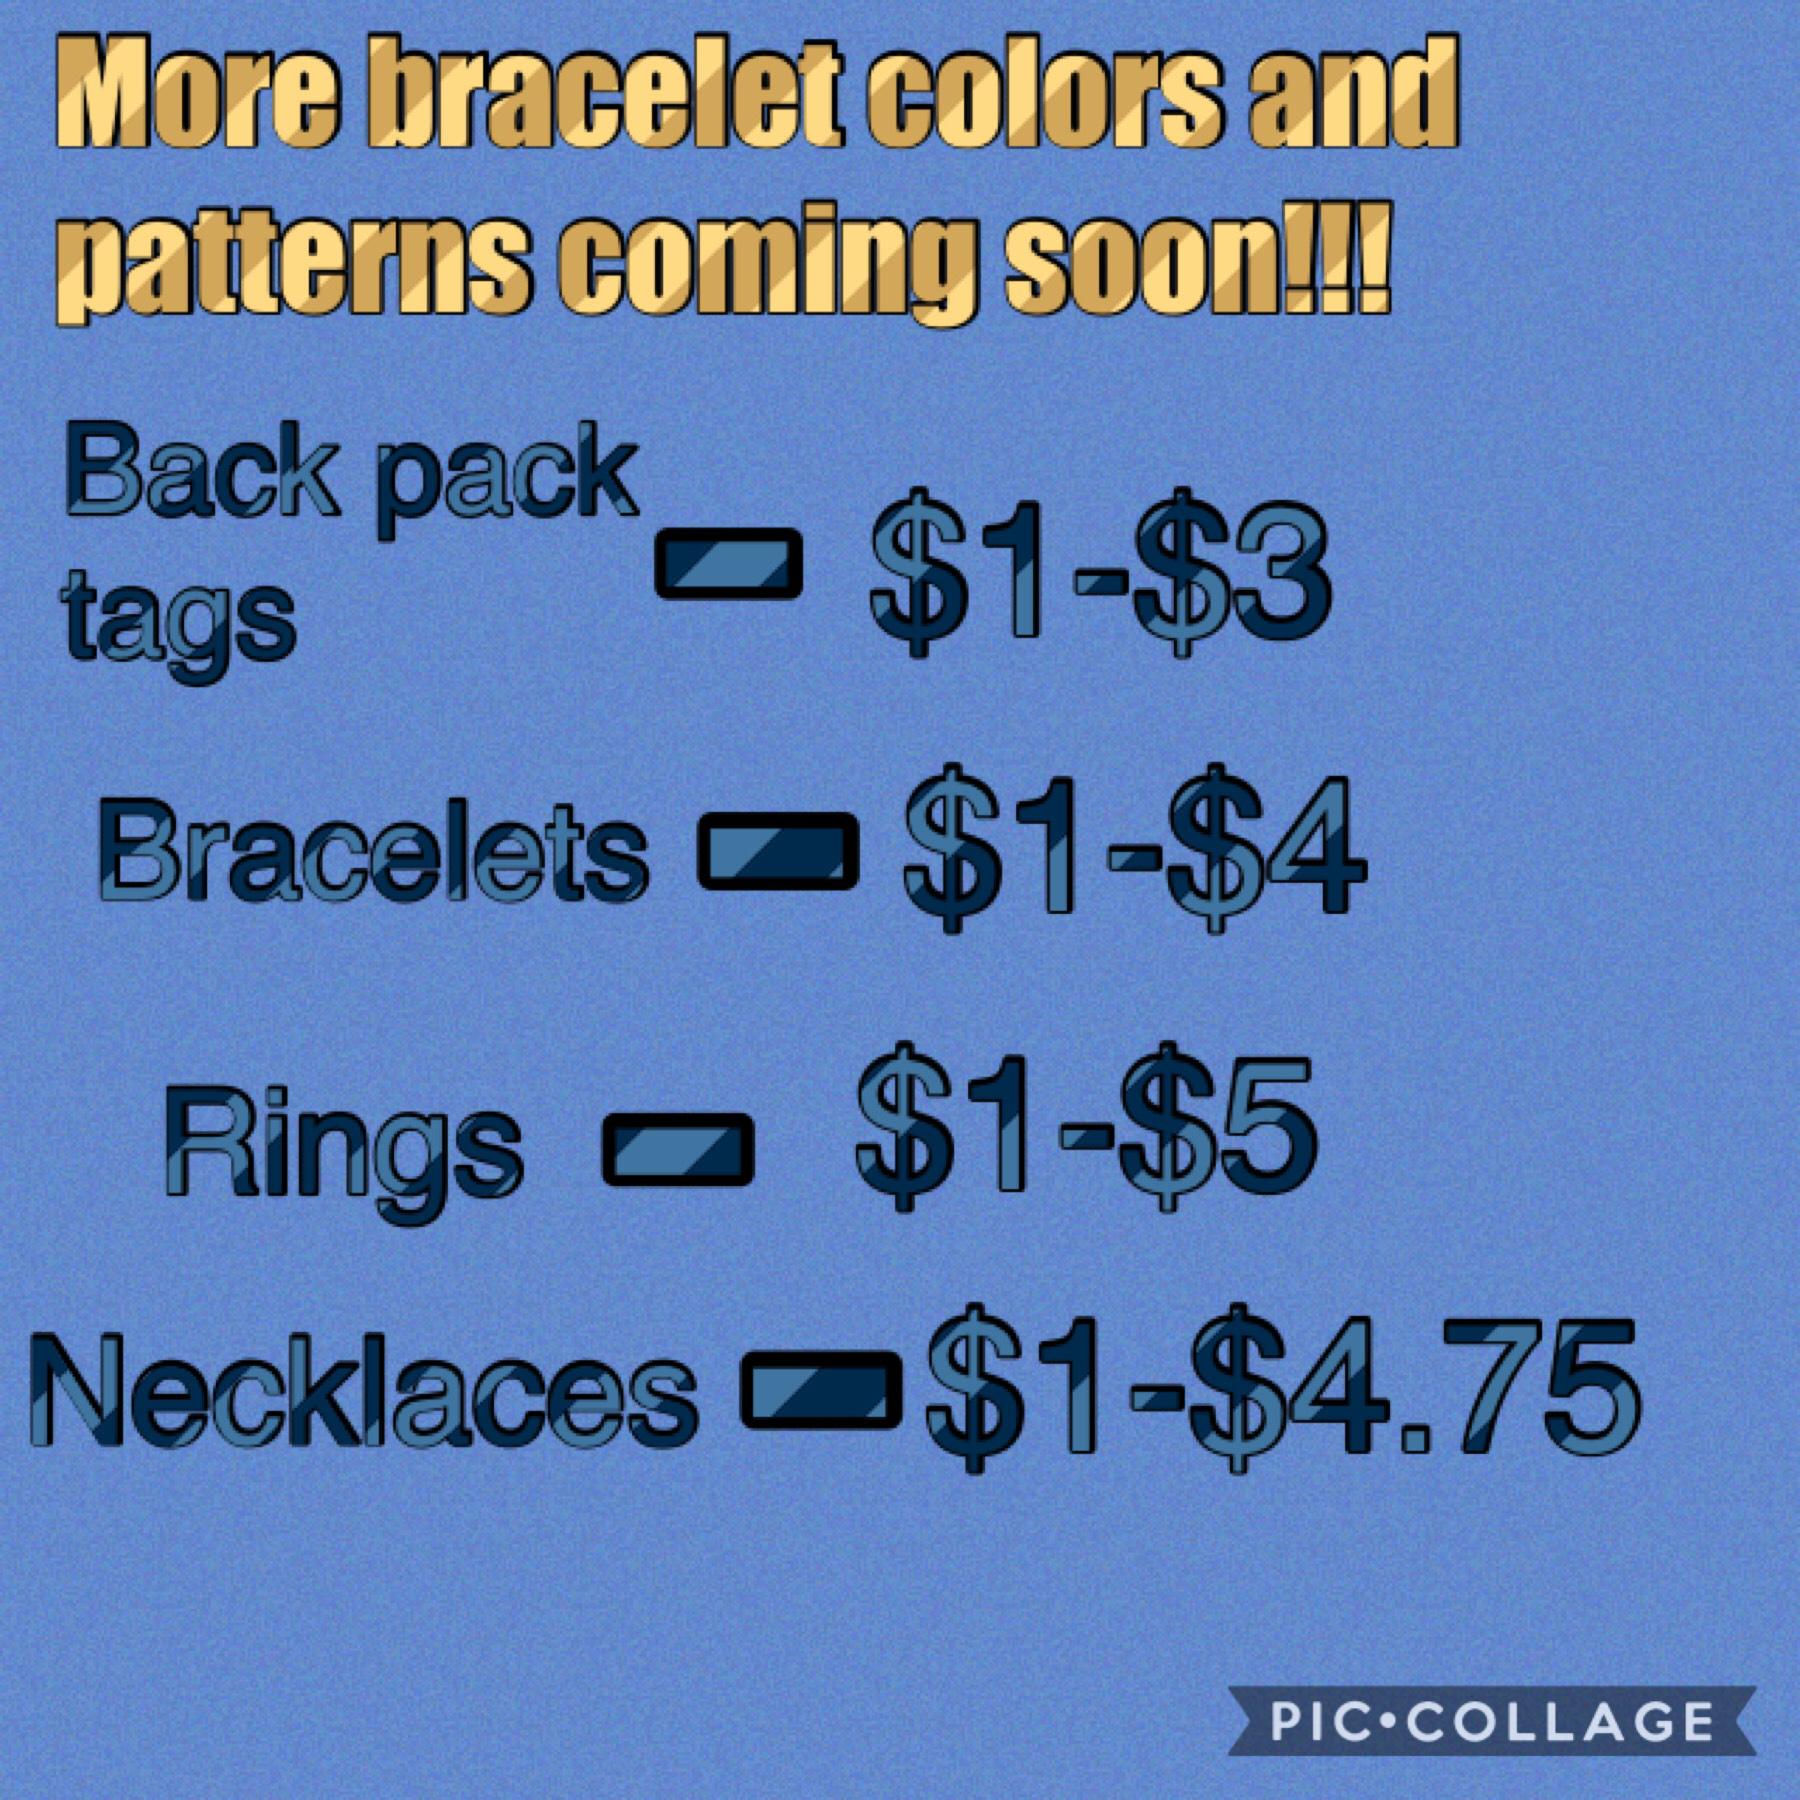 Back back tags
Bracelets
Rings
& Necklaces 
All in between $1-$6
Any ?’s contact info in next collage 
Follow me for more updates about my business!!!